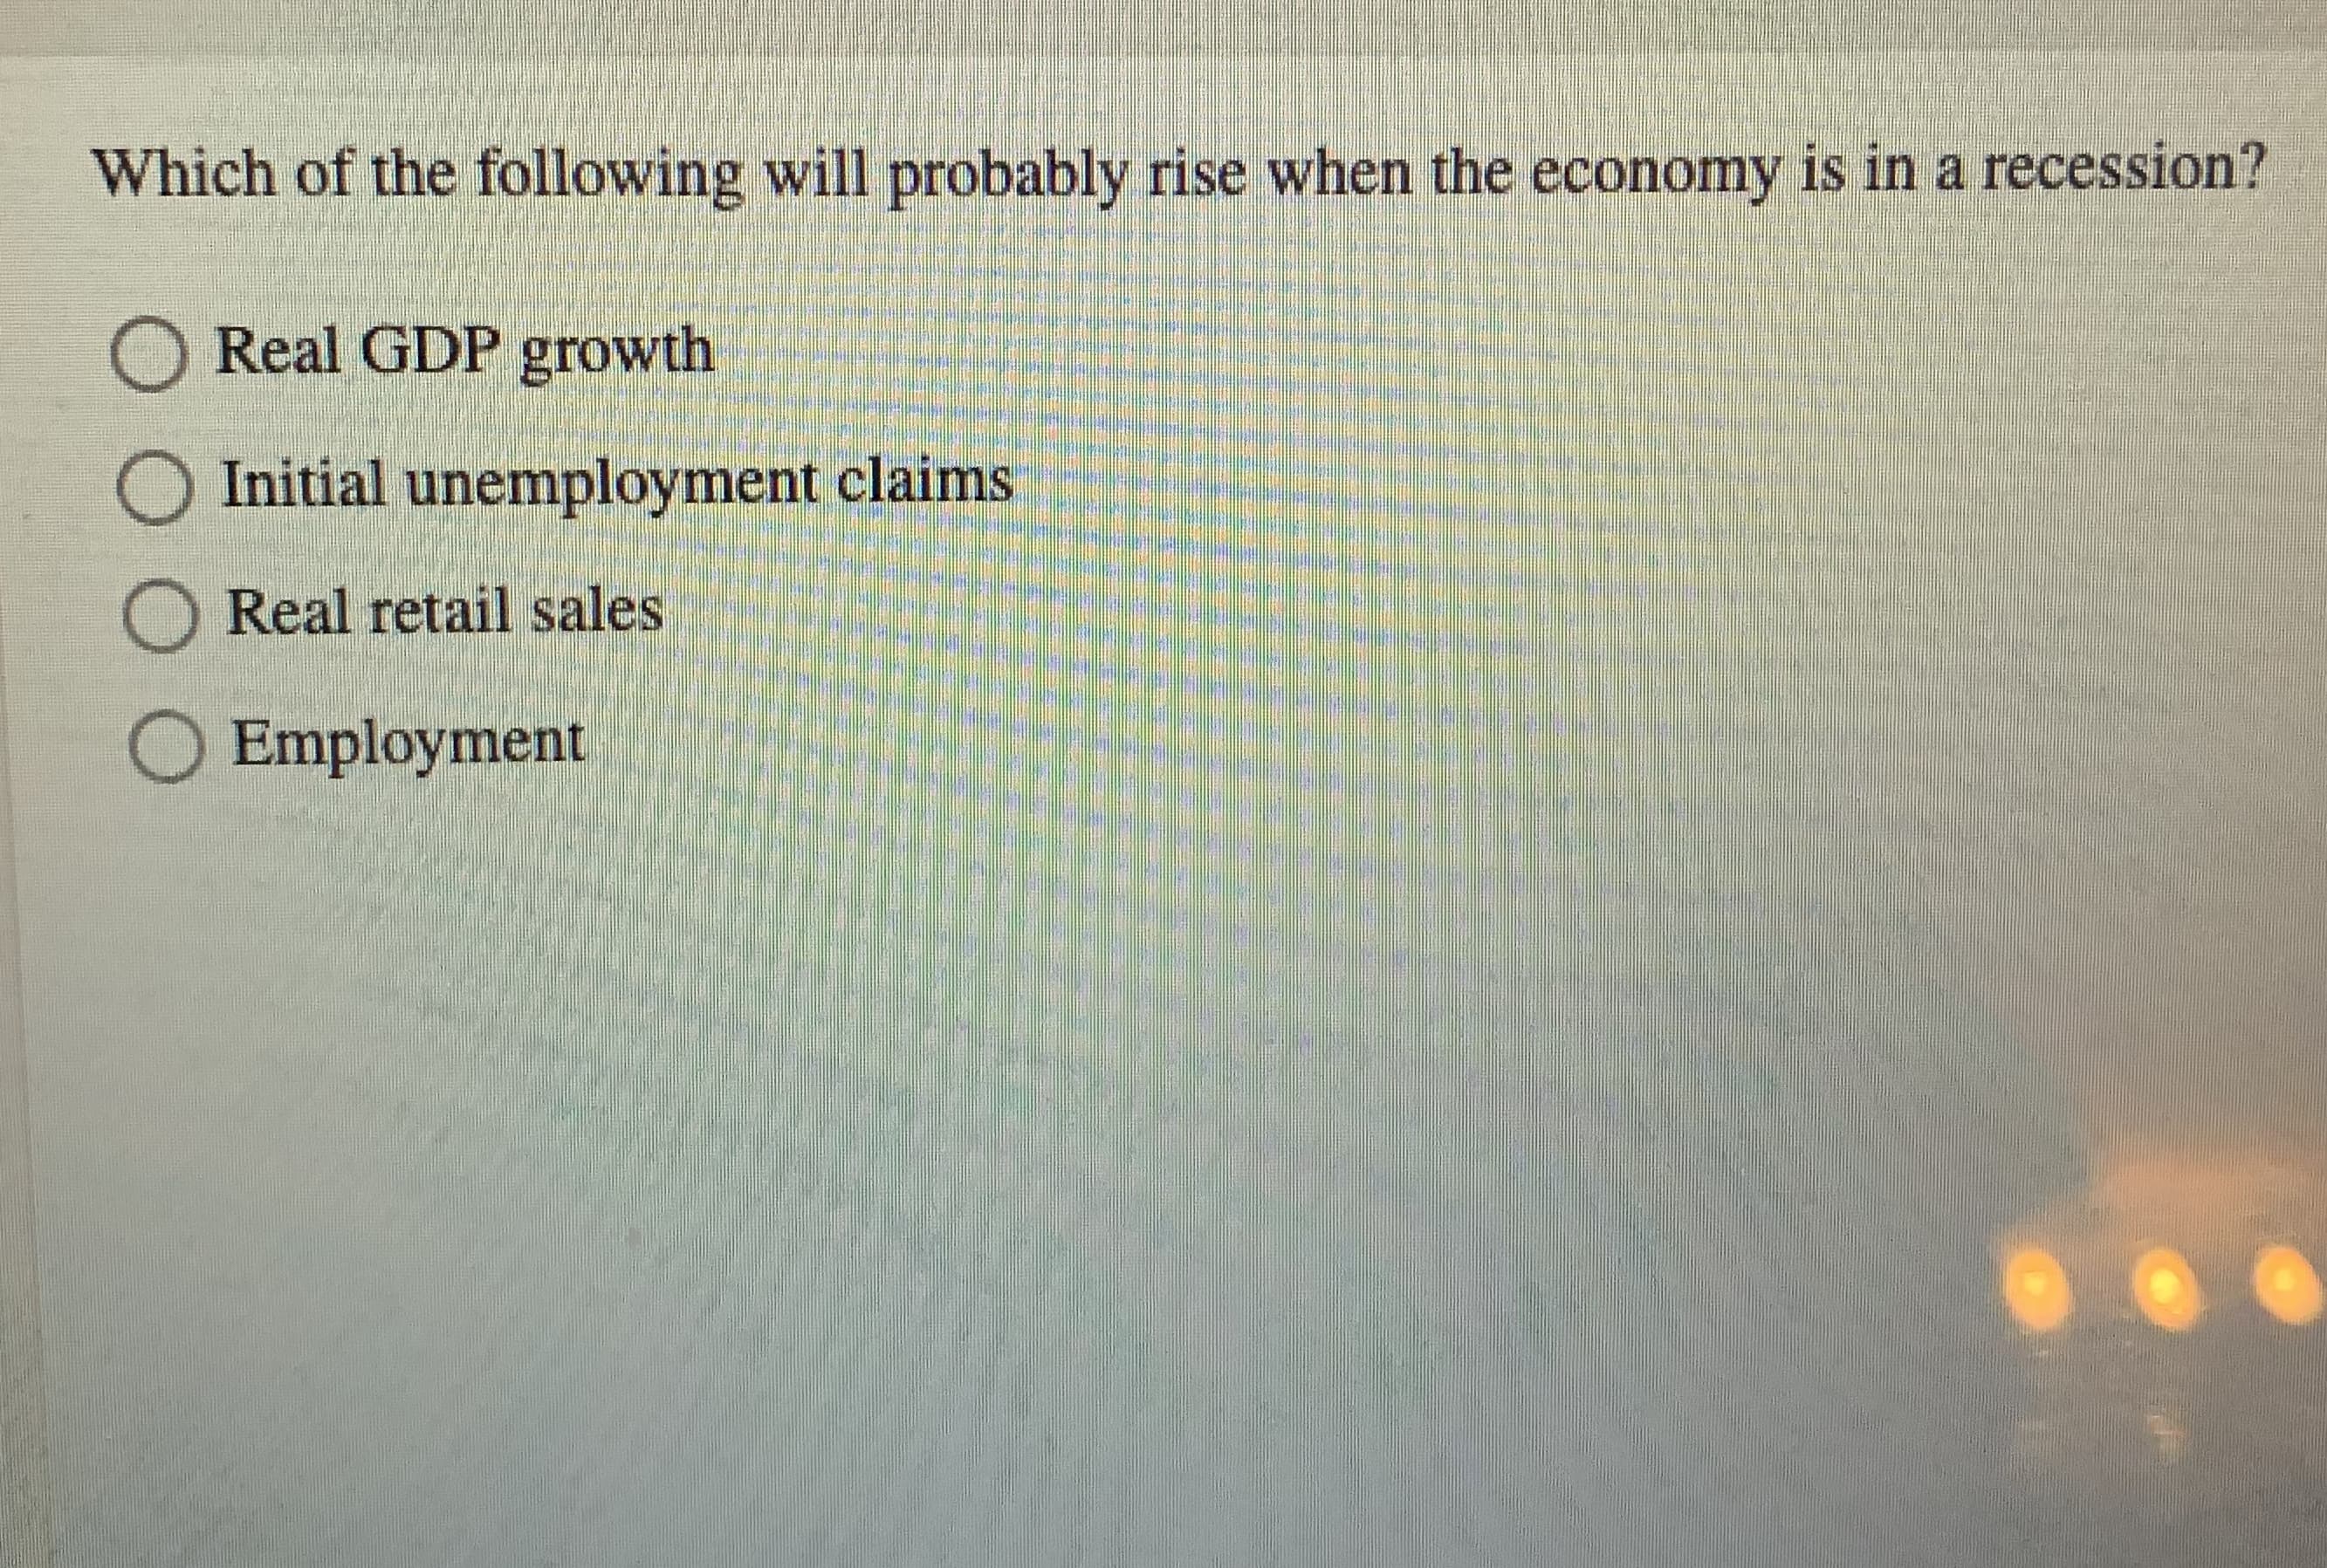 Which of the following will probably rise when the economy is in a recession?
